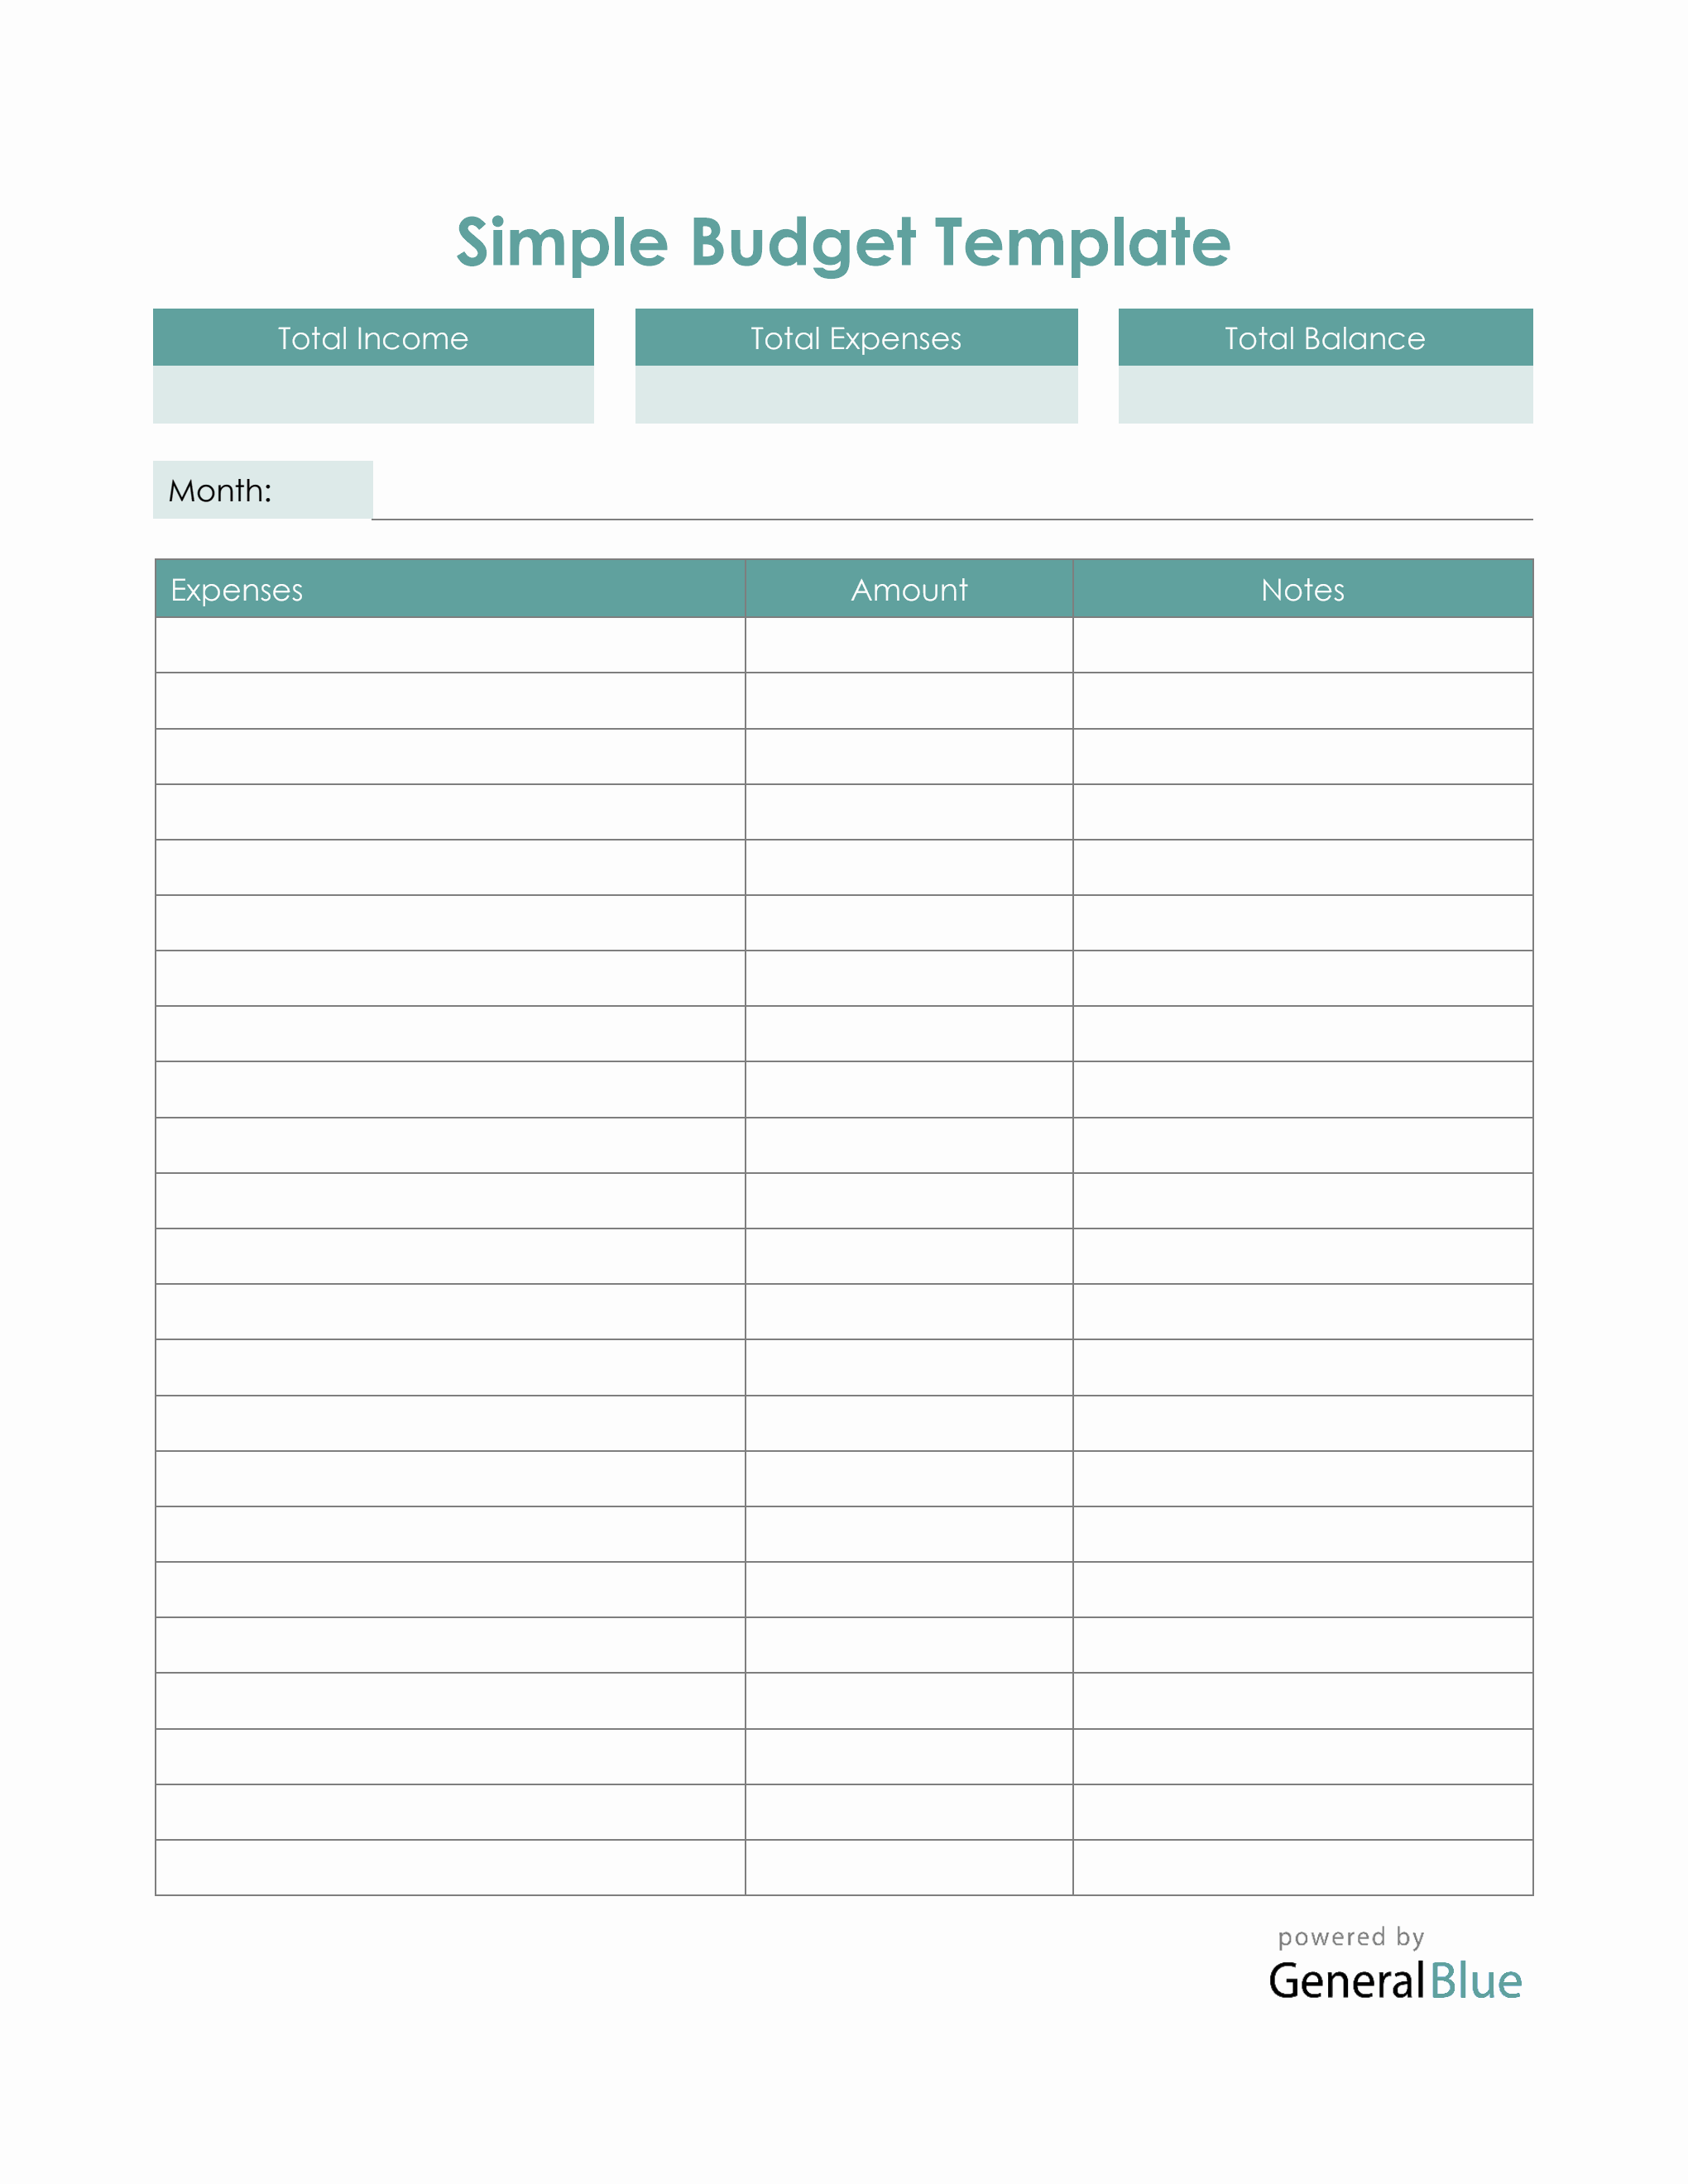 goodnotes-budget-template